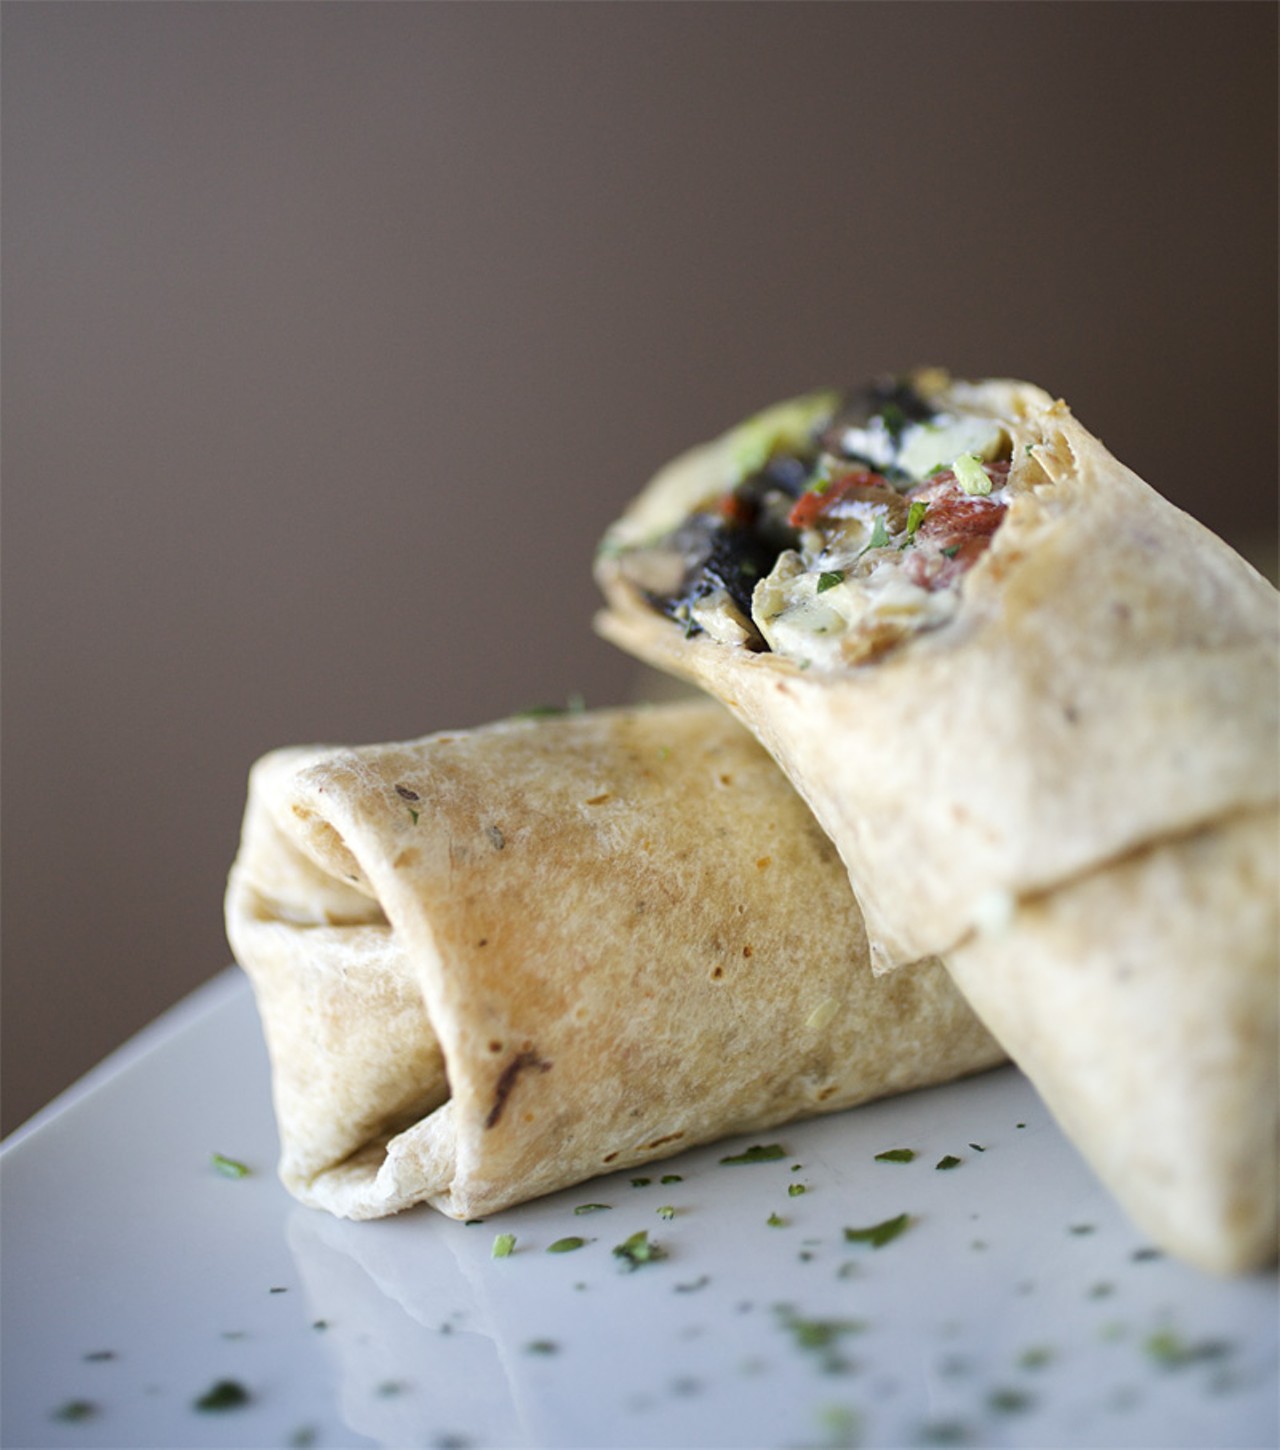 The Portabella Wrap is made with marinated and grilled portabella mushrooms, grilled red peppers, carmelized onion, grilled artichoke hearts, topped with goat cheese and feta blended and then wrapped in a sundried tomato tortilla.